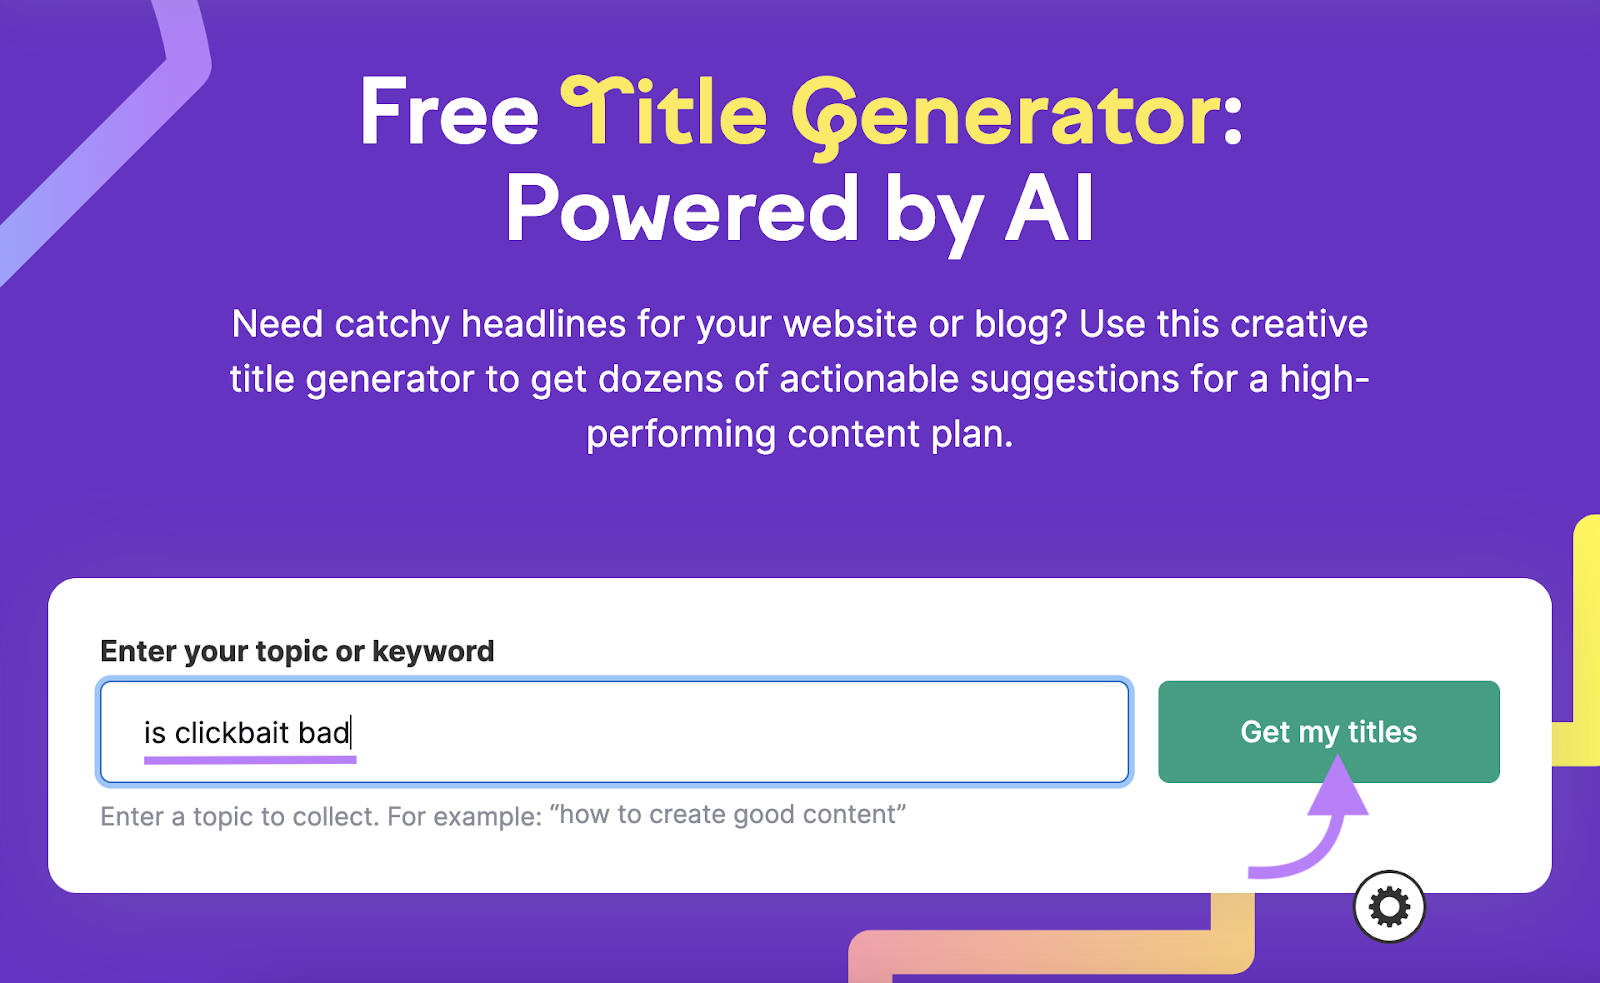 Search for “Is clickbait bad?” in titile generator tool